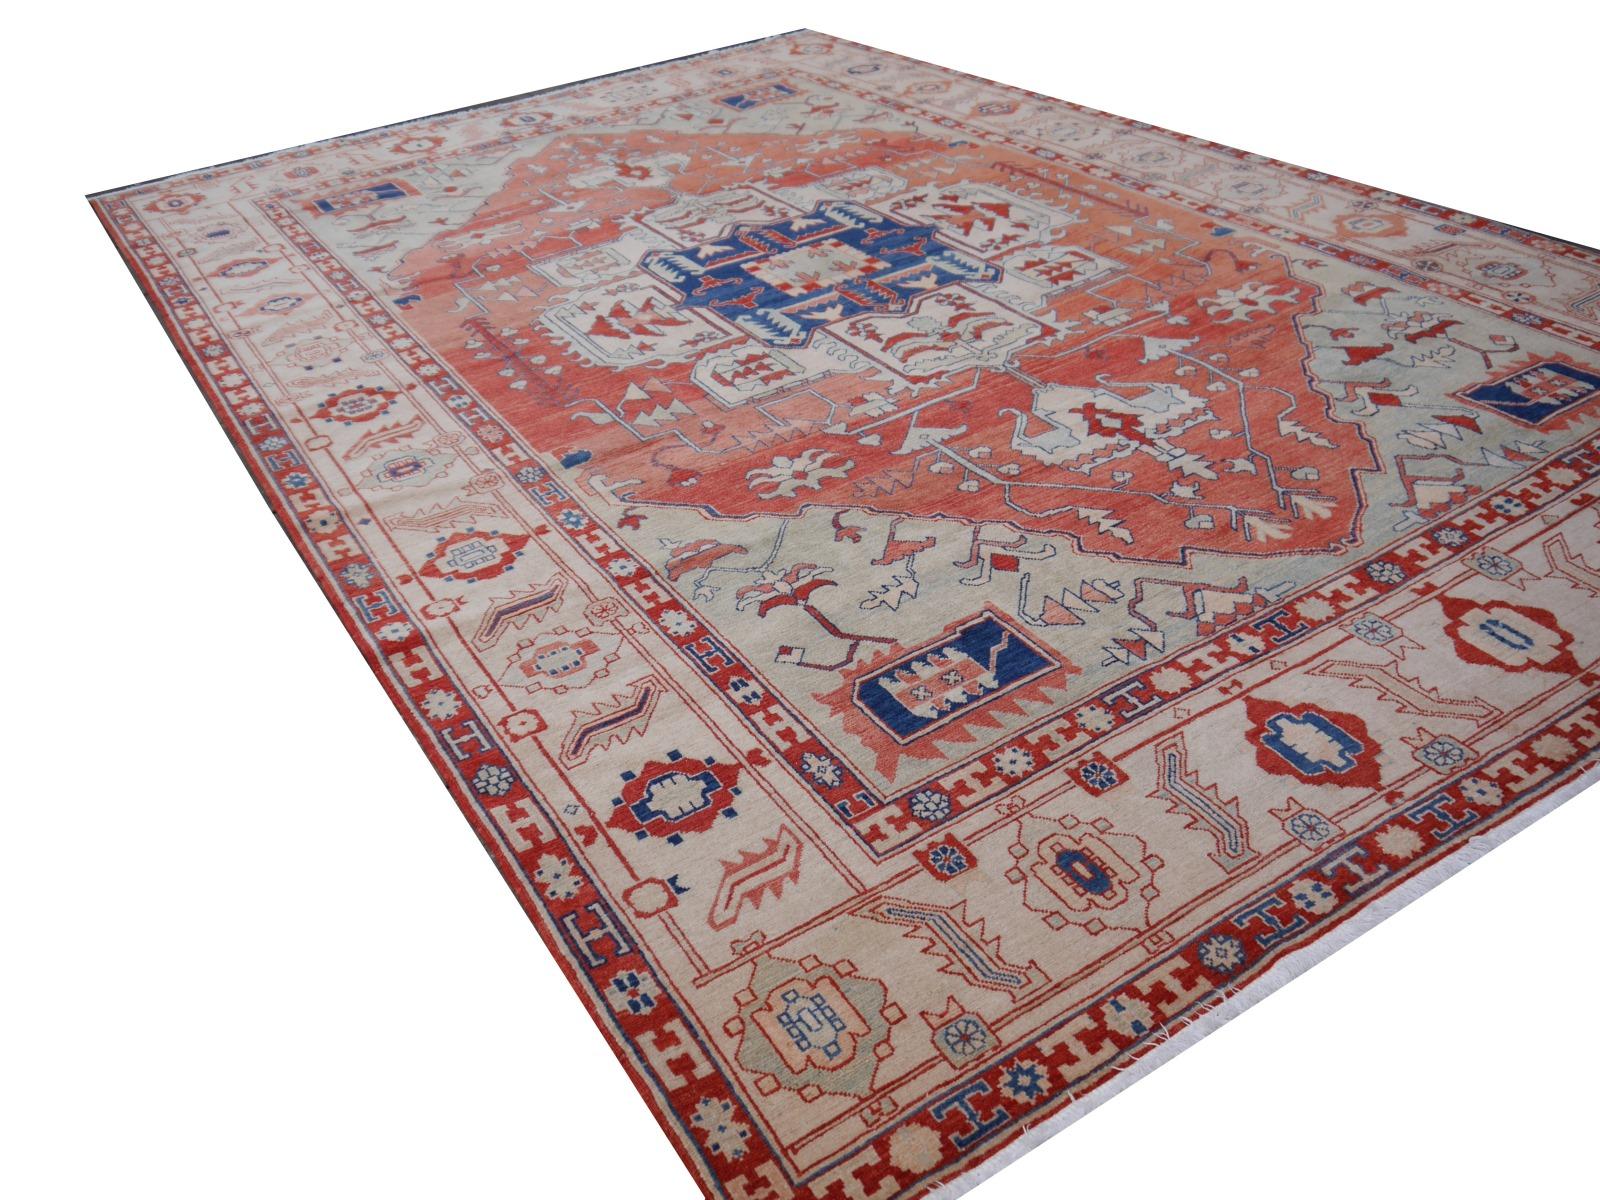 A large sized Turkish Azeri rug with Heriz Bakhshaish design. The pile is made of high end quality wool - hand spun, hand dyed with all vegetable dyes and knotted by master weavers. The rug is very decorative, the condition is exquisite. The rug was